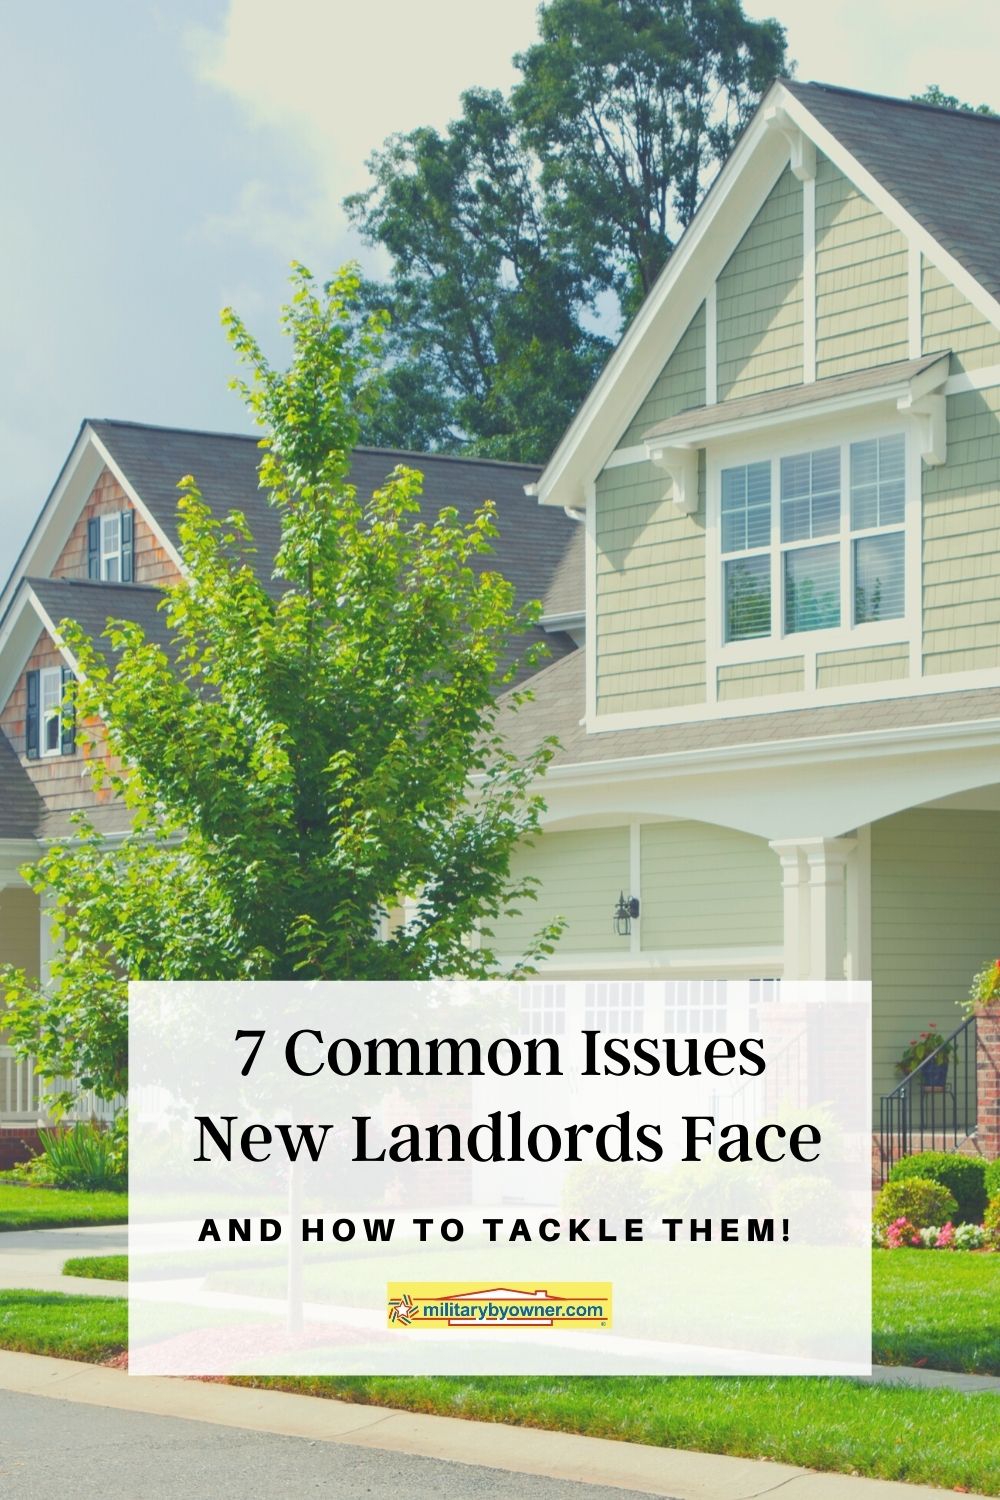 7_Common_Issues_New_Landlords_Face